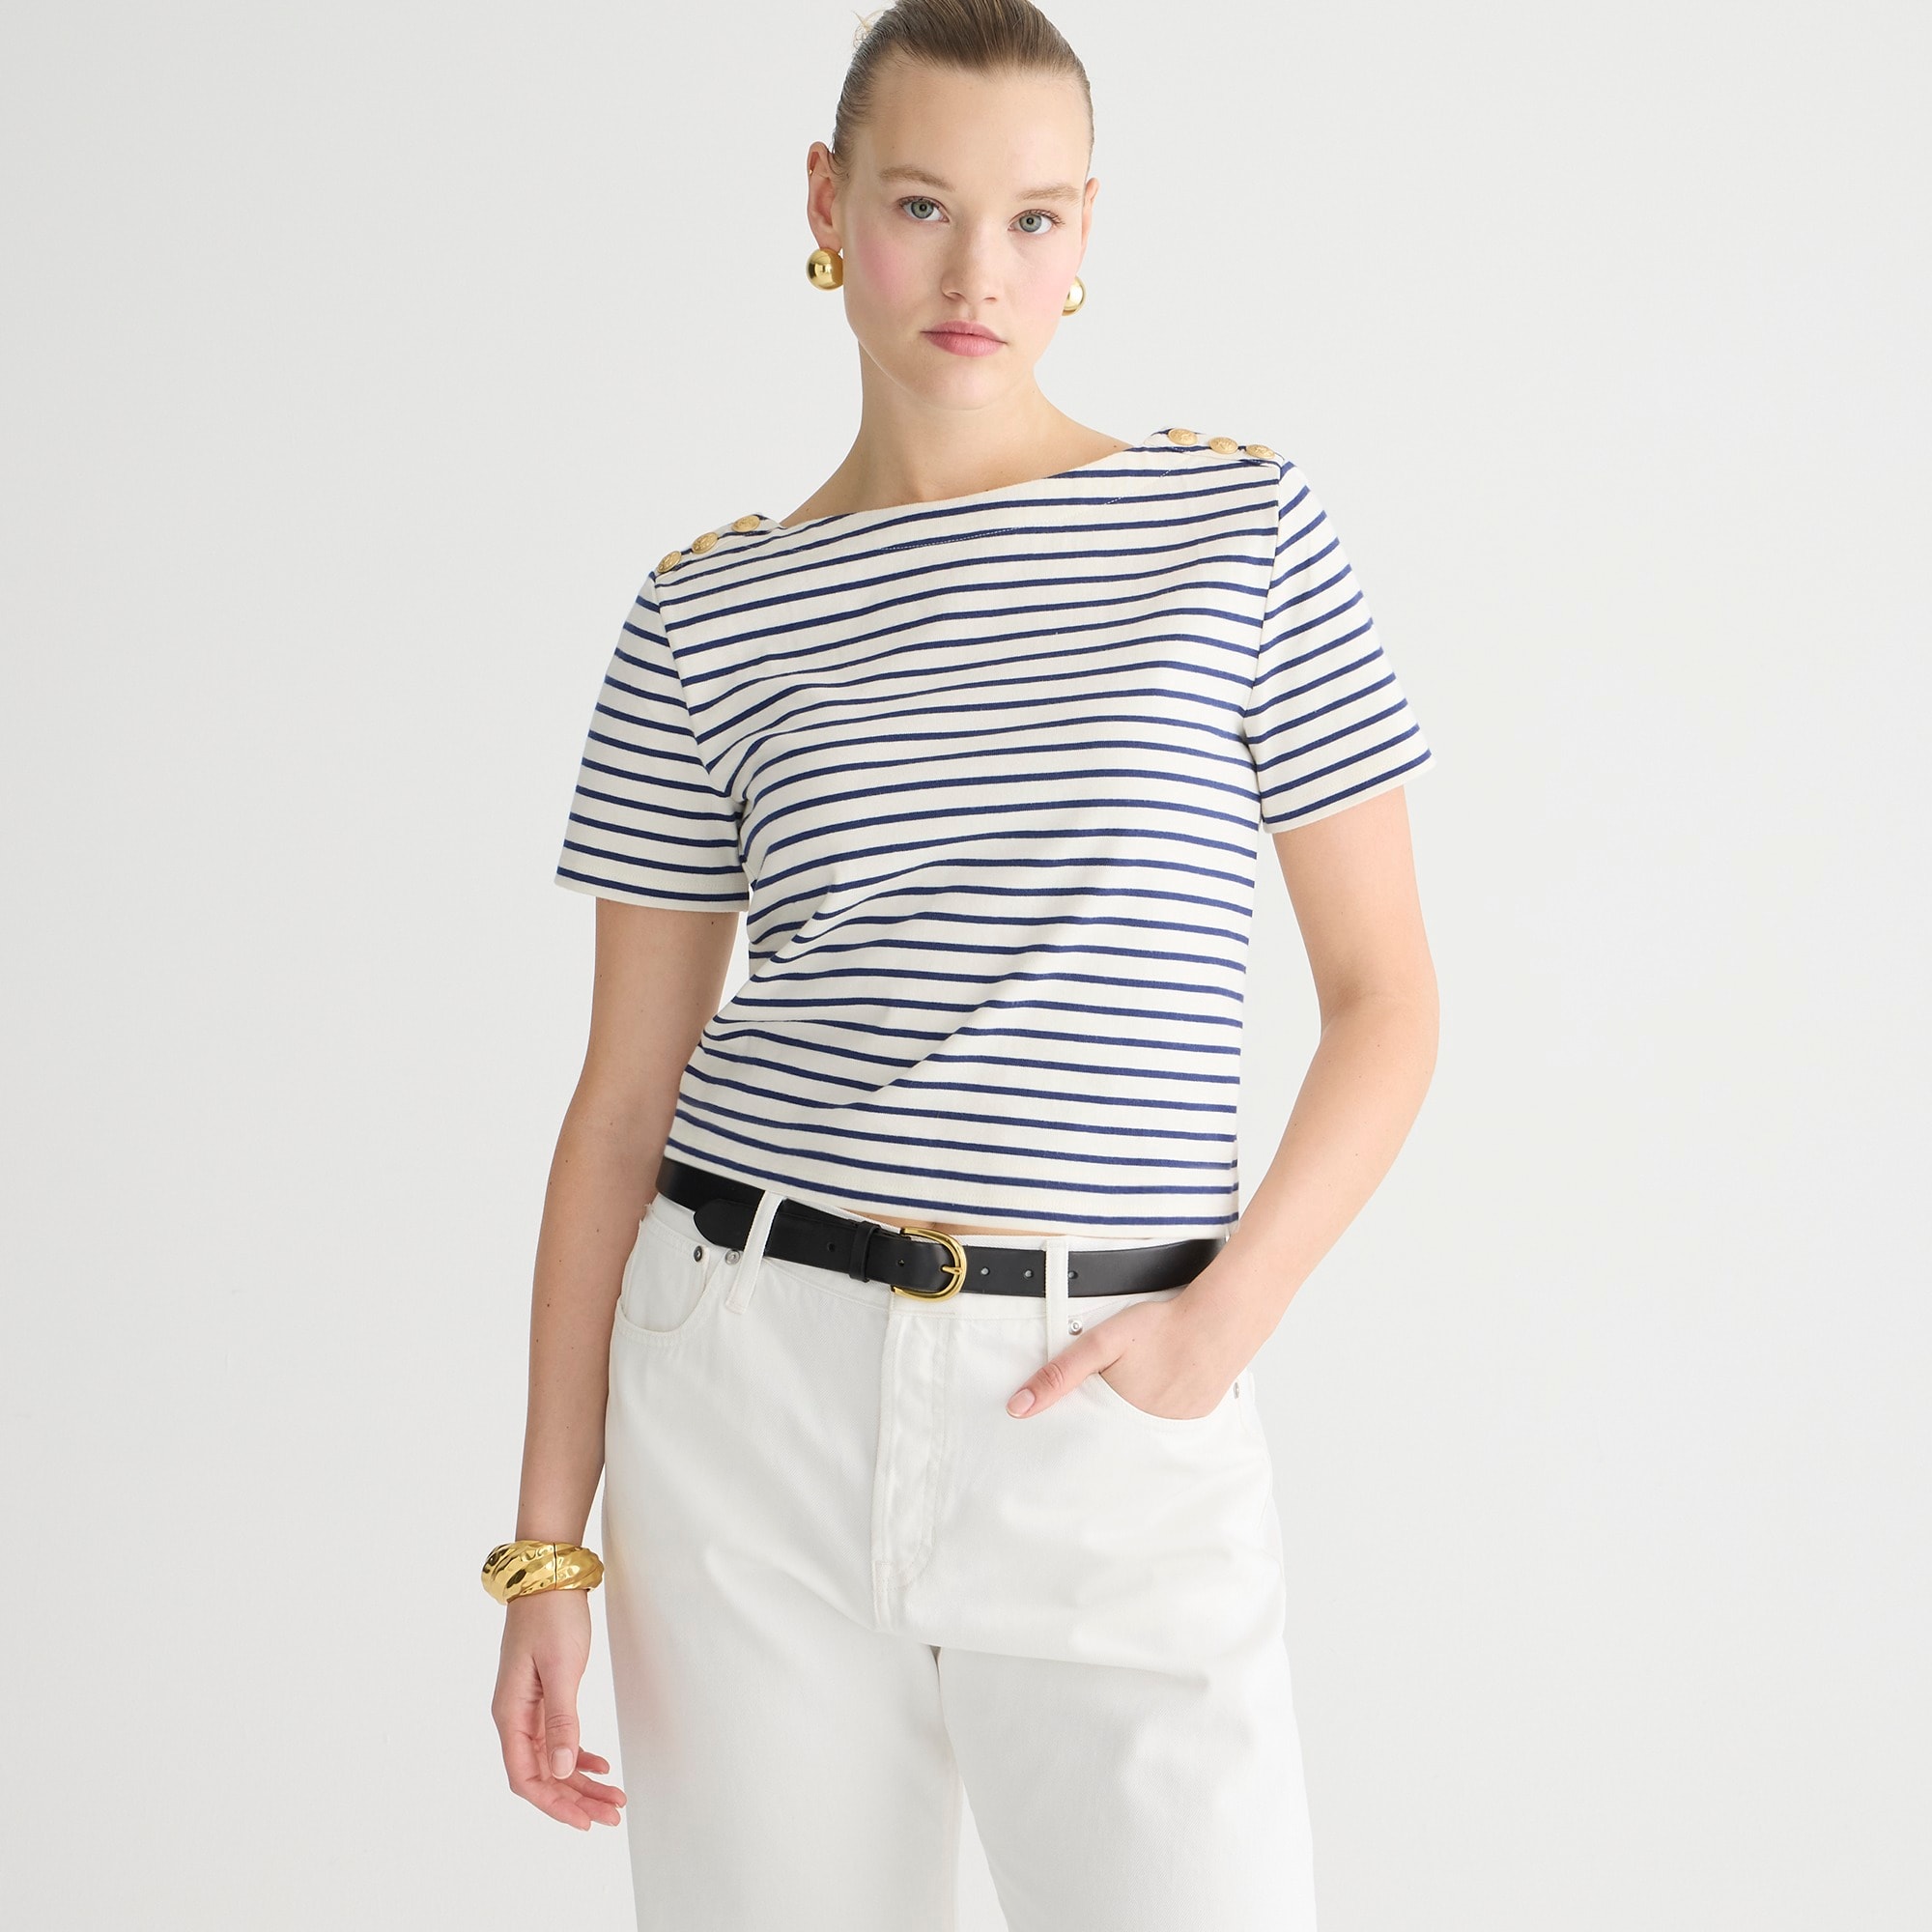 Jcrew Mariner cloth short-sleeve T-shirt with buttons